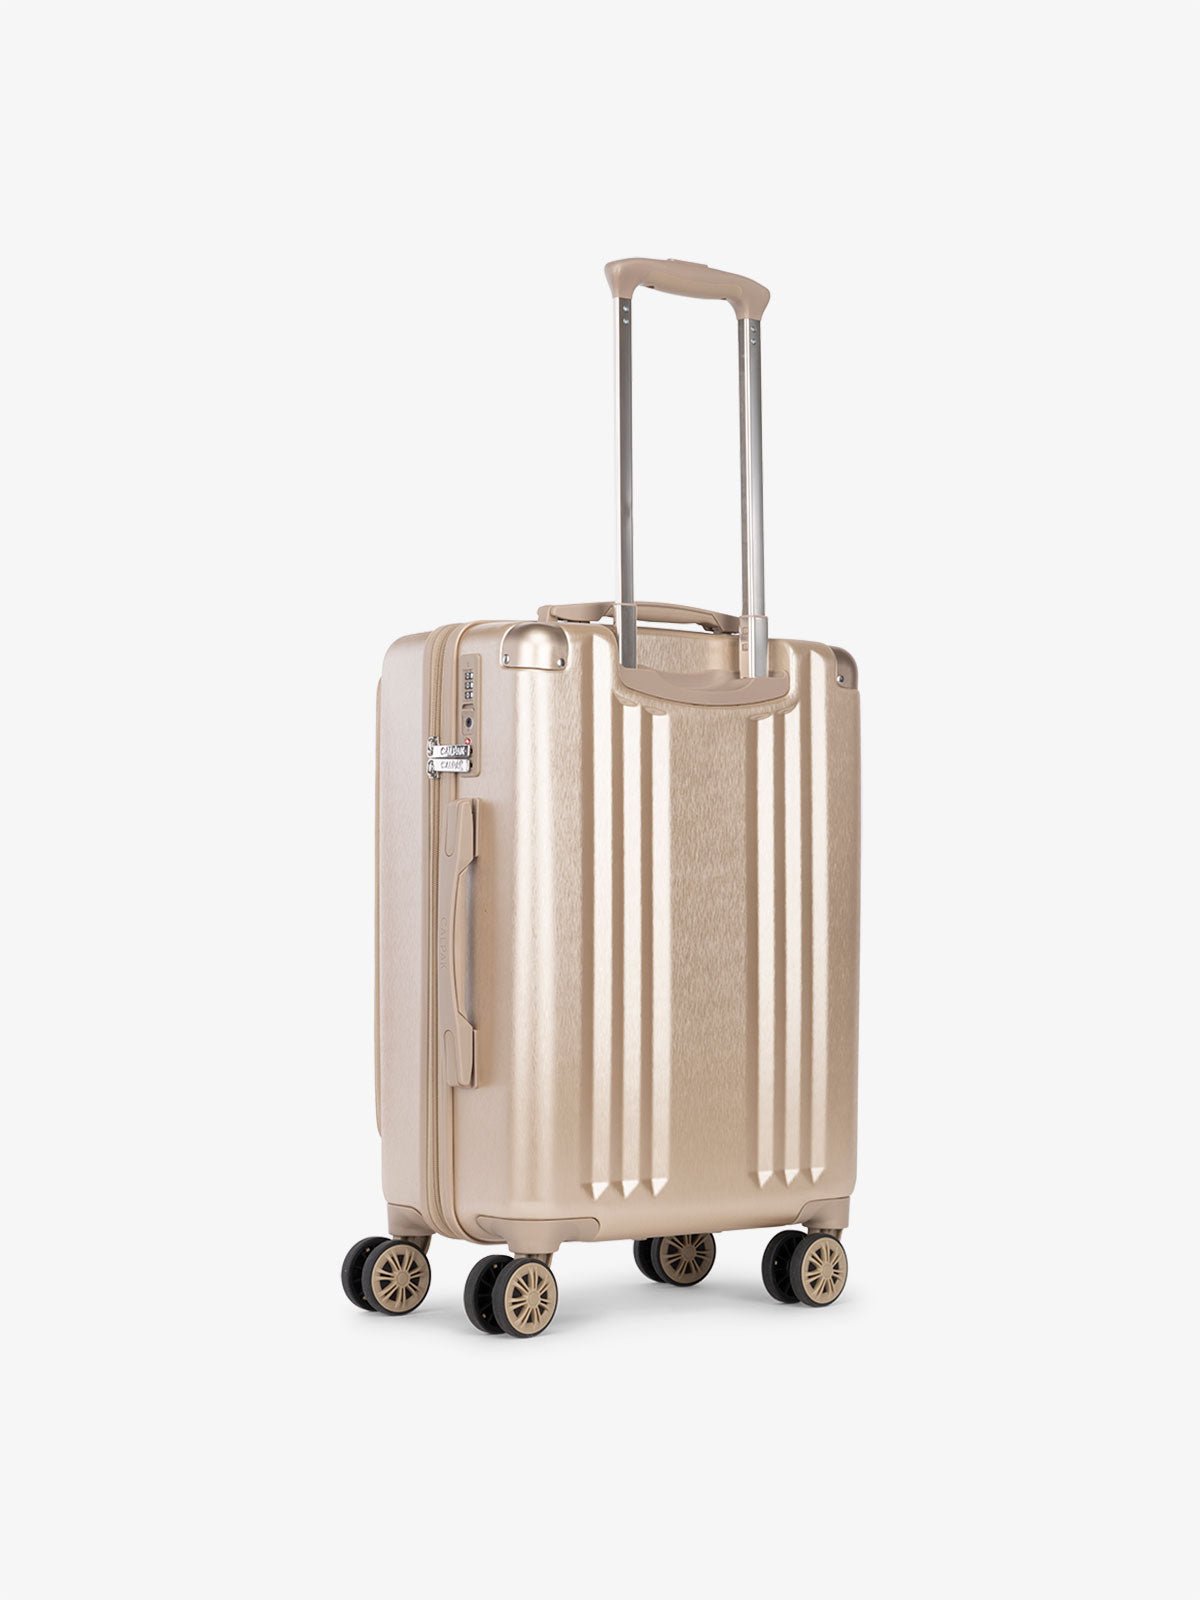 CALPAK Ambeur lightweight carry-on luggage with laptop front pocket, TSA lock and 360 spinner wheels in gold